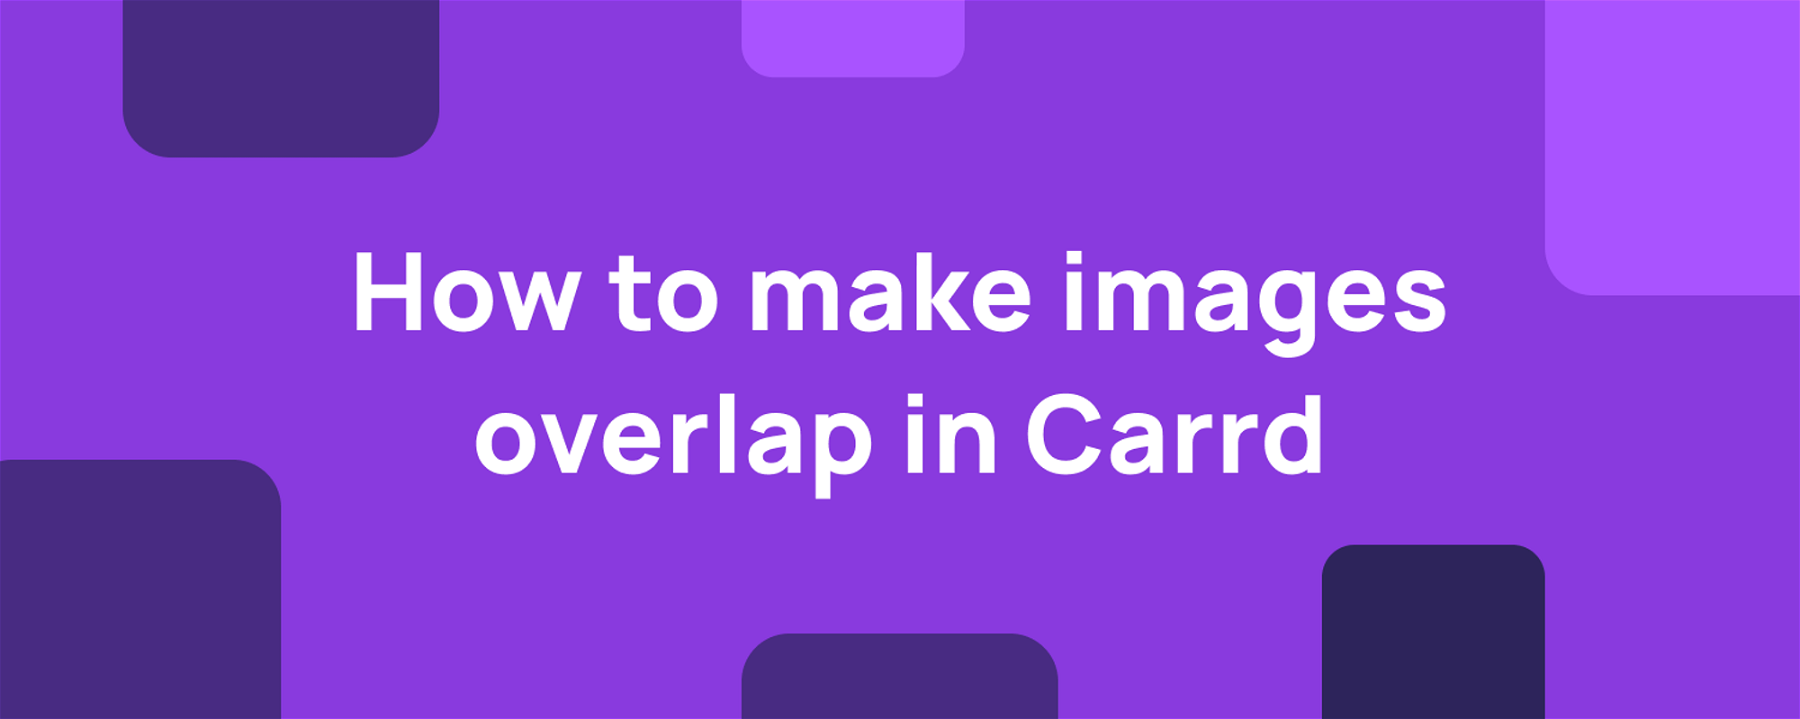 How to make images overlap in Carrd